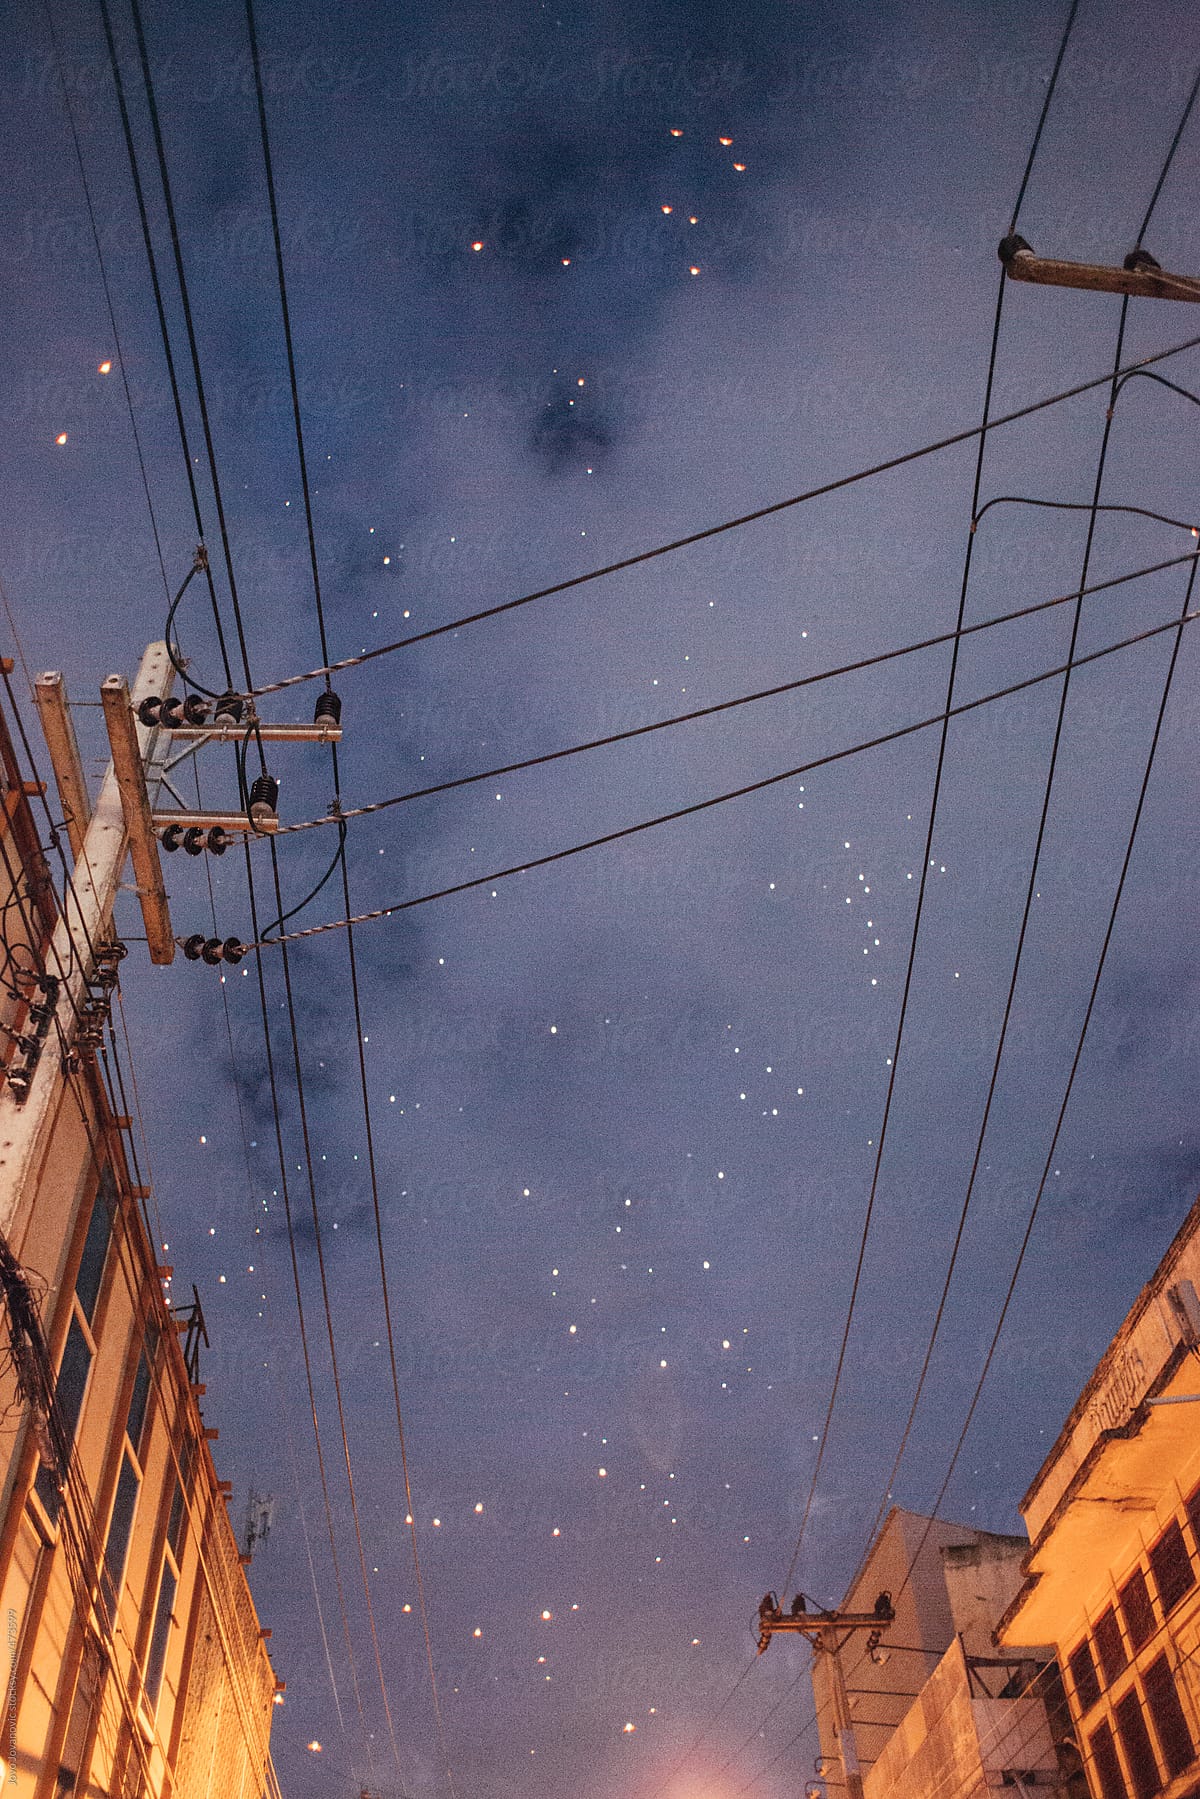 Night time sky and stars with electricity lines and old buildings